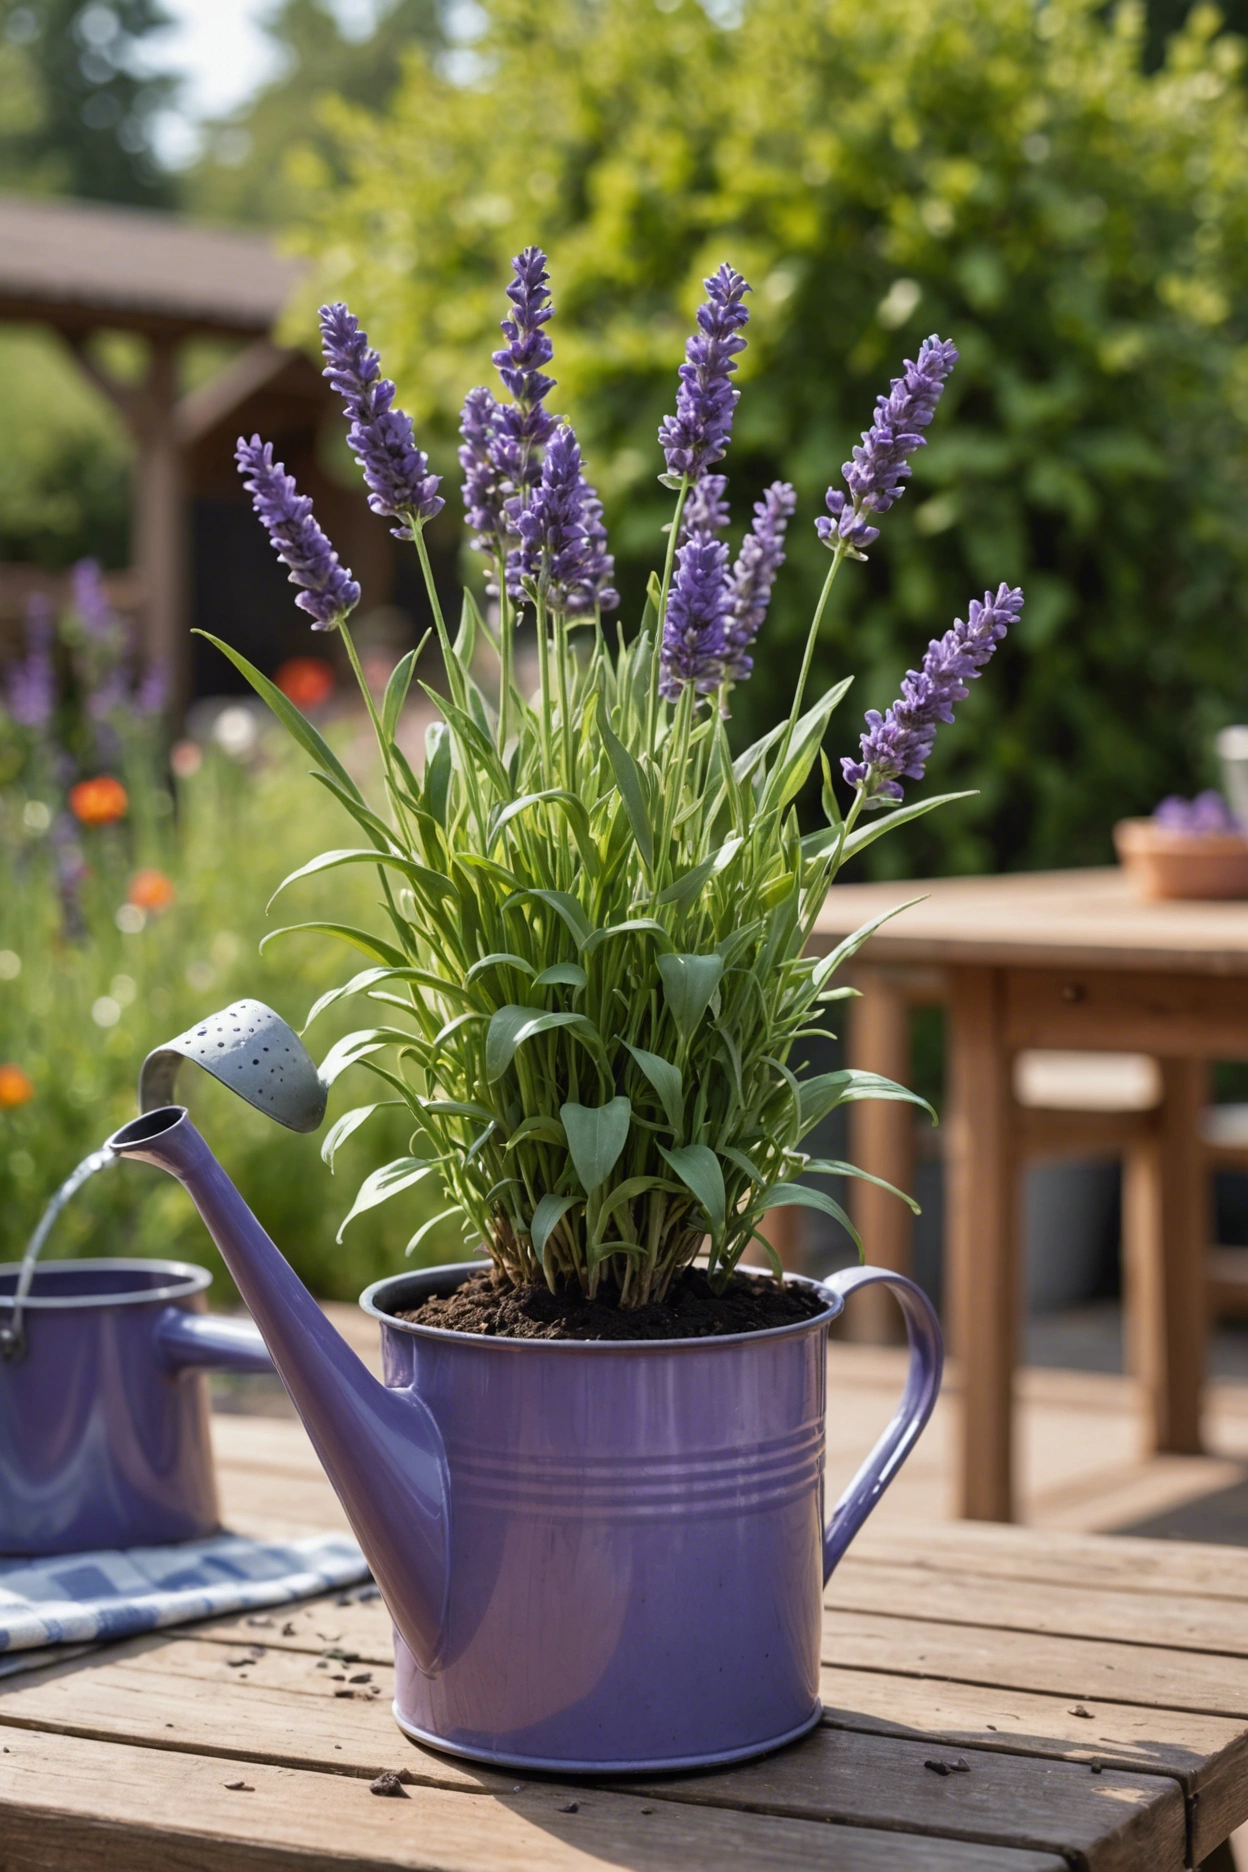 "Wilted lavender plant in a pot on a garden table, indicating overwatering, with a watering can nearby."